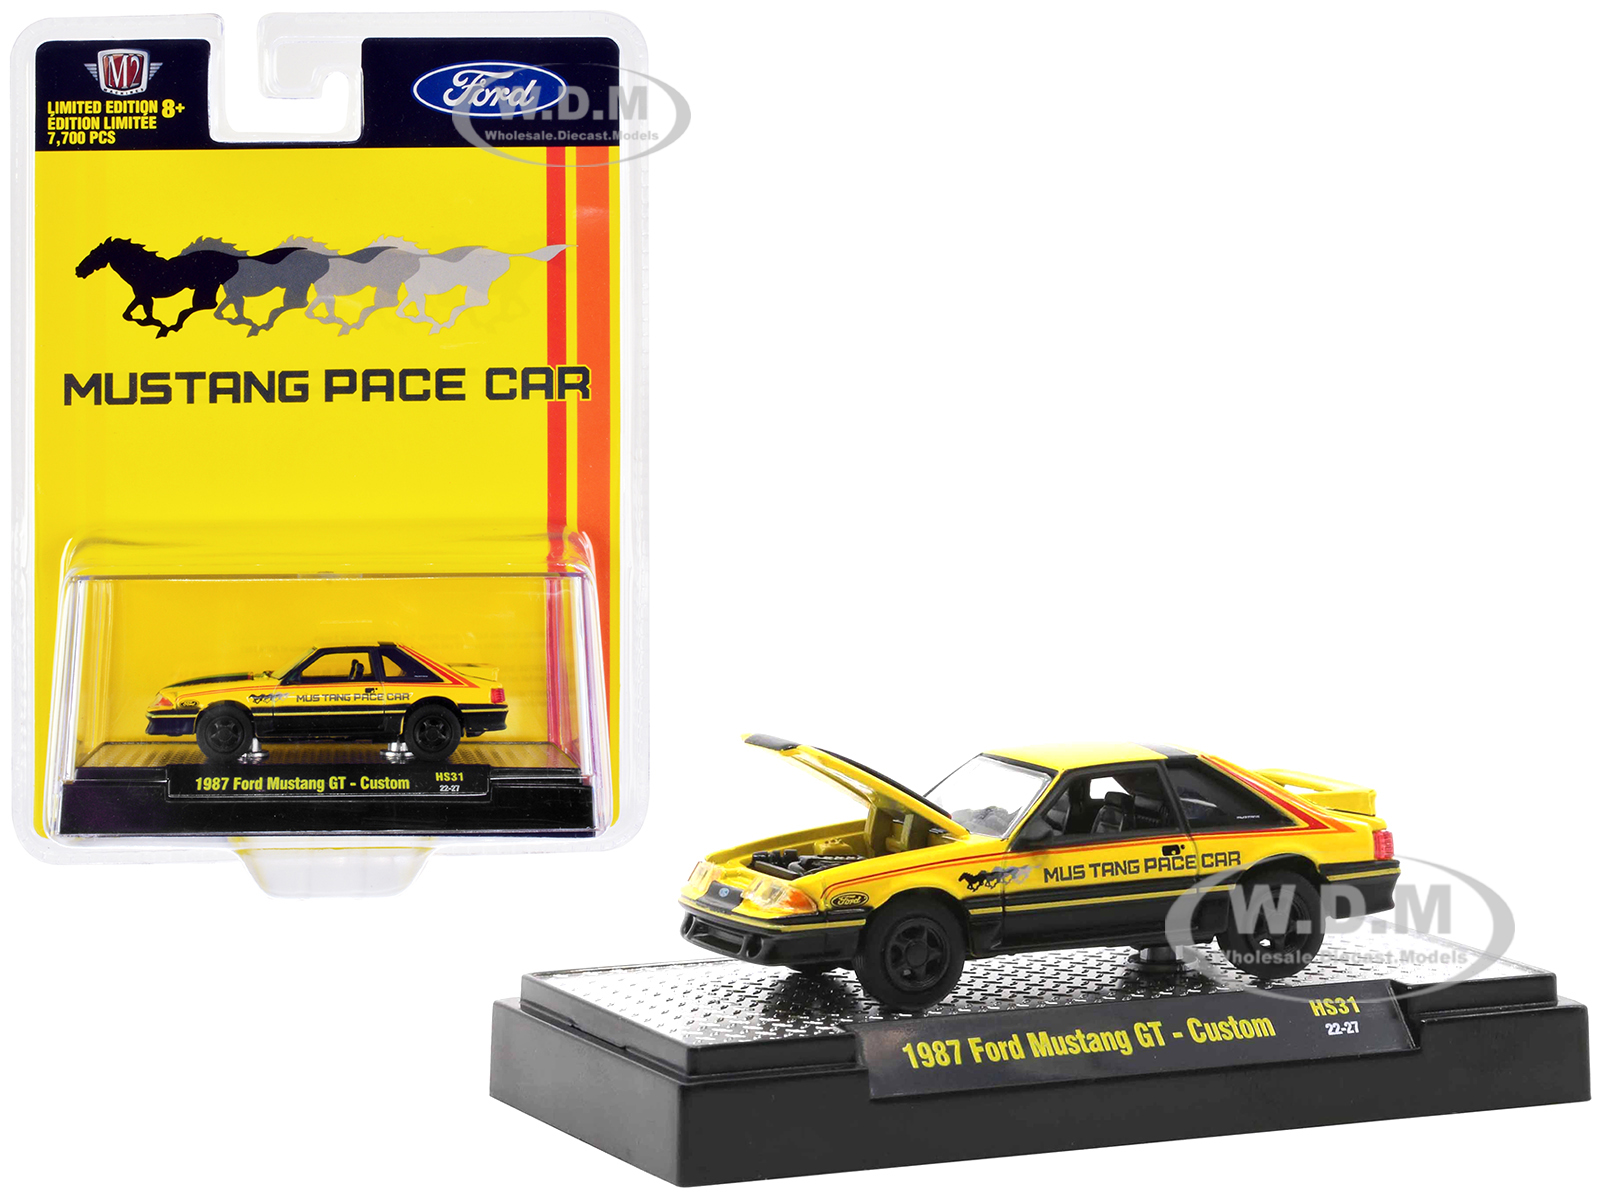 1987 Ford Mustang GT Custom Pearl Yellow and Black with Stripes "Mustang Pace Car" Limited Edition to 7700 pieces Worldwide 1/64 Diecast Model Car by